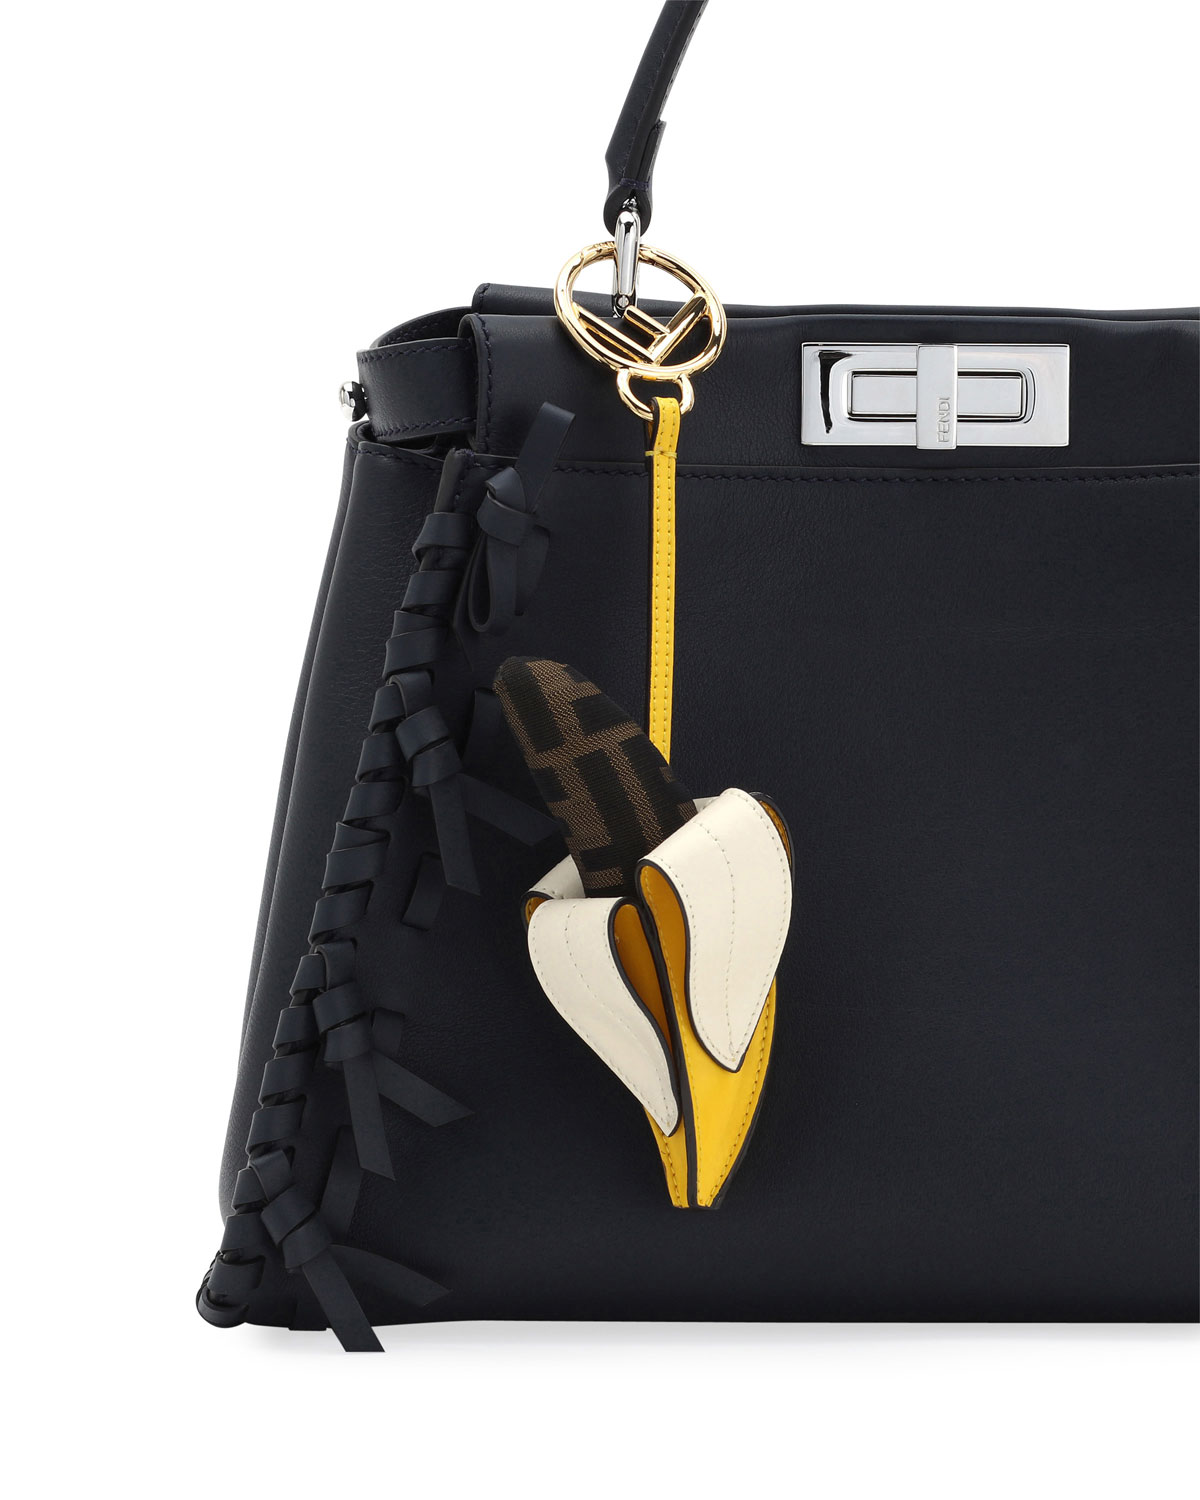 I Can't Believe How Much I Want a Fendi 